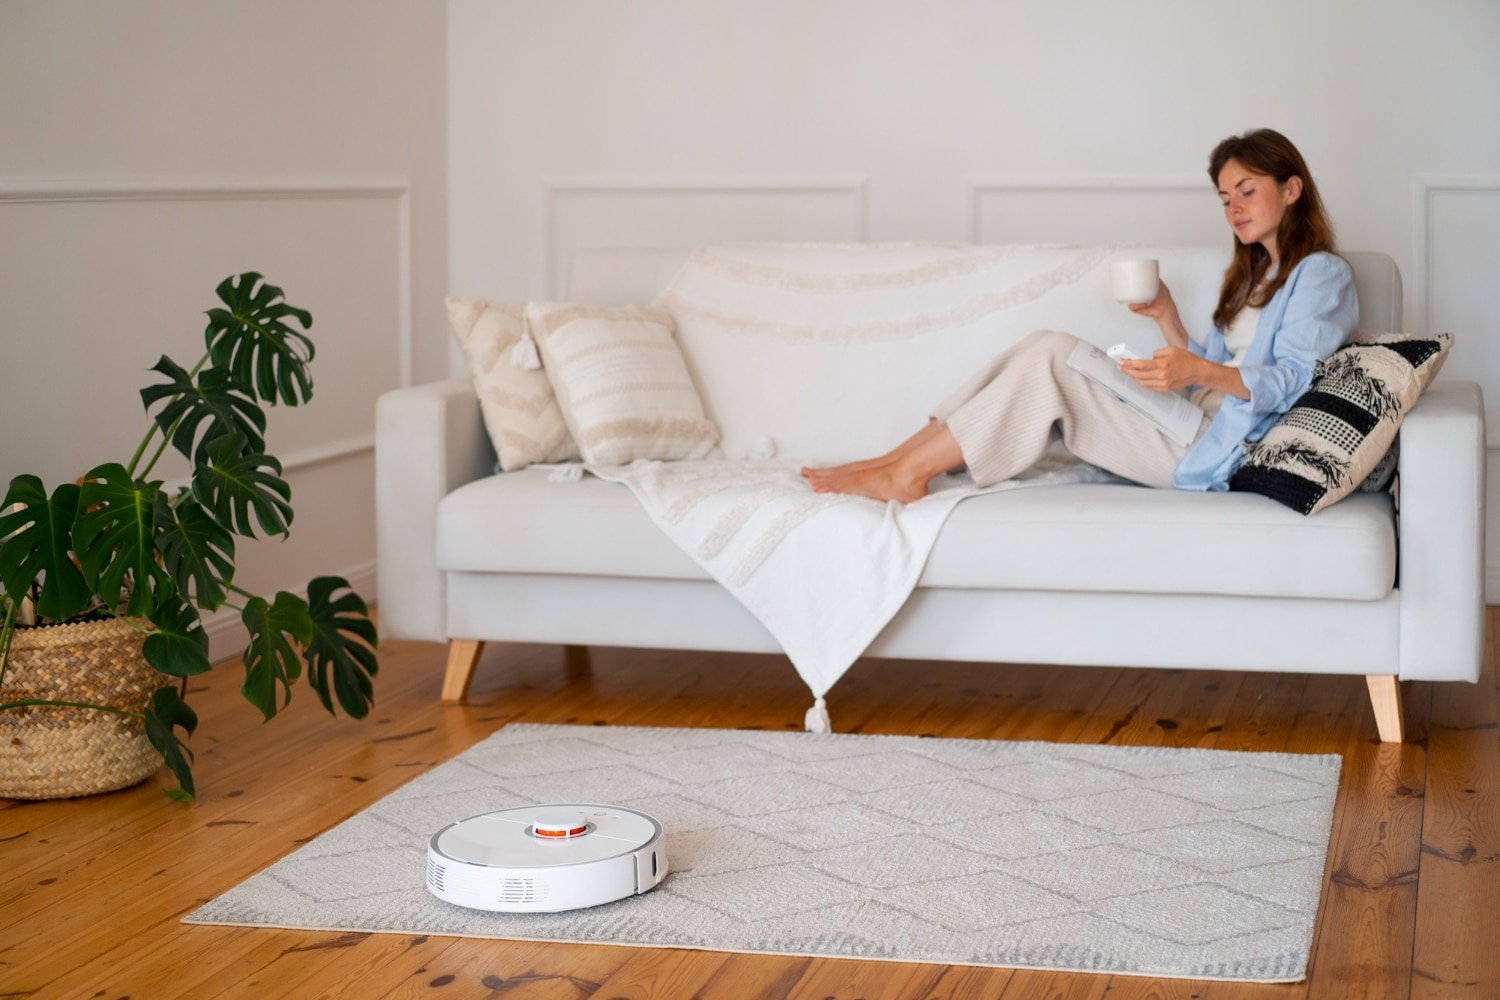 Automate Your Home Cleaning With iRobot.com’s Robotic Vacuums